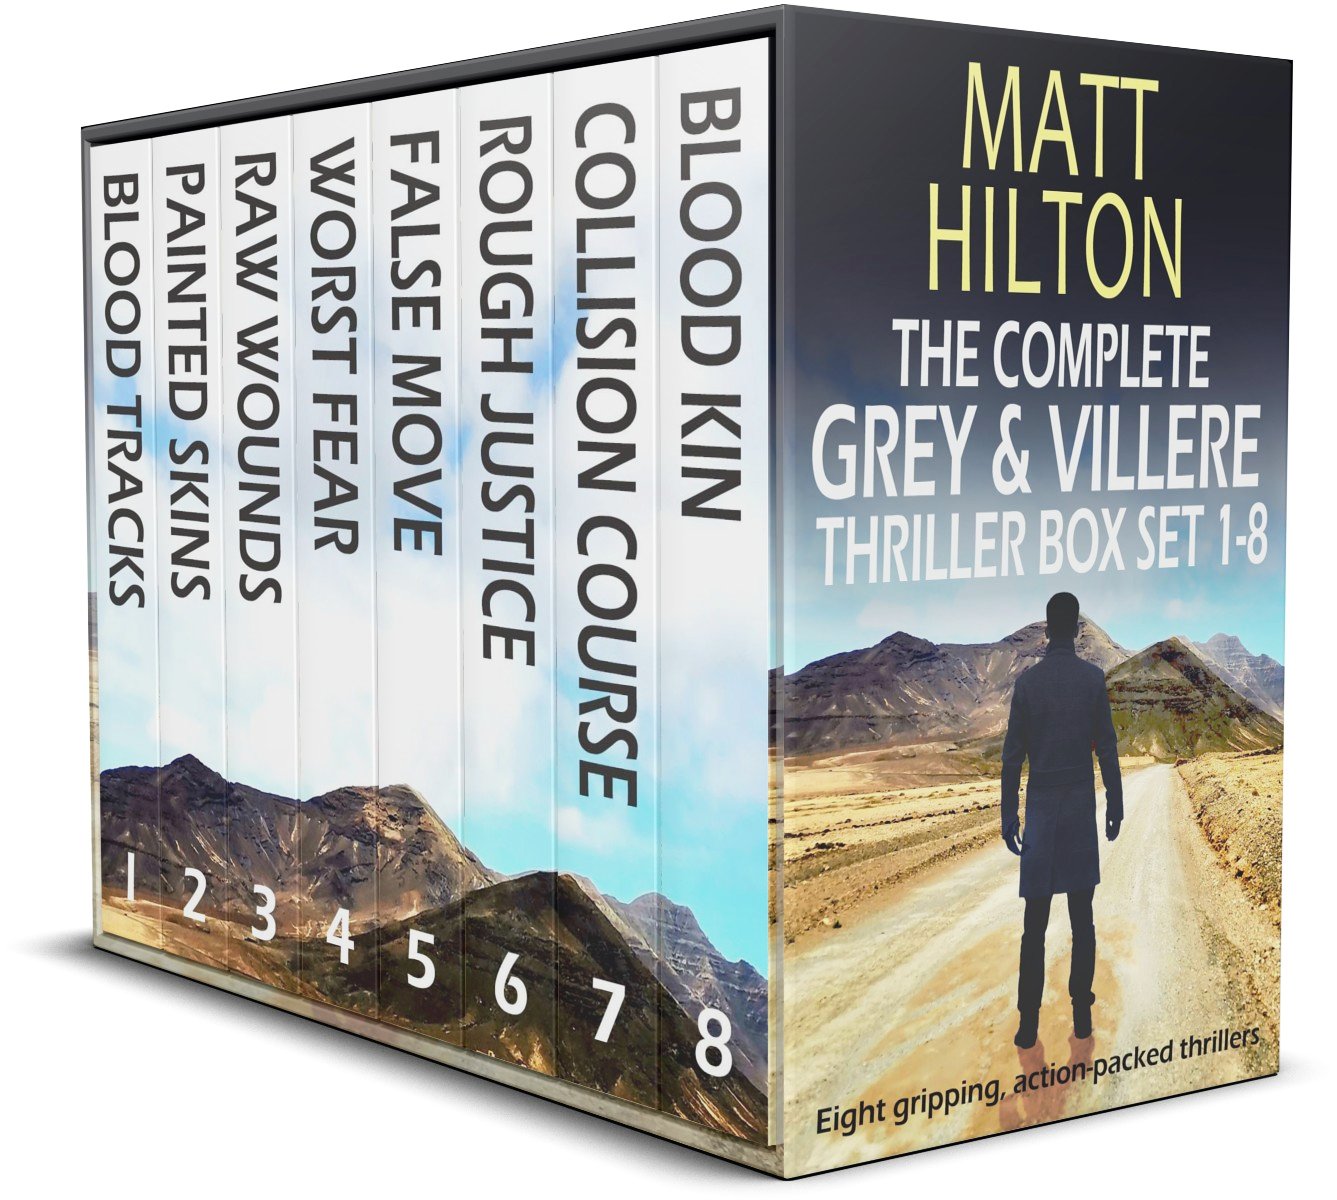 COMPLETE GREY AND VILLERE THRILLER BOX SET cover publish.jpg